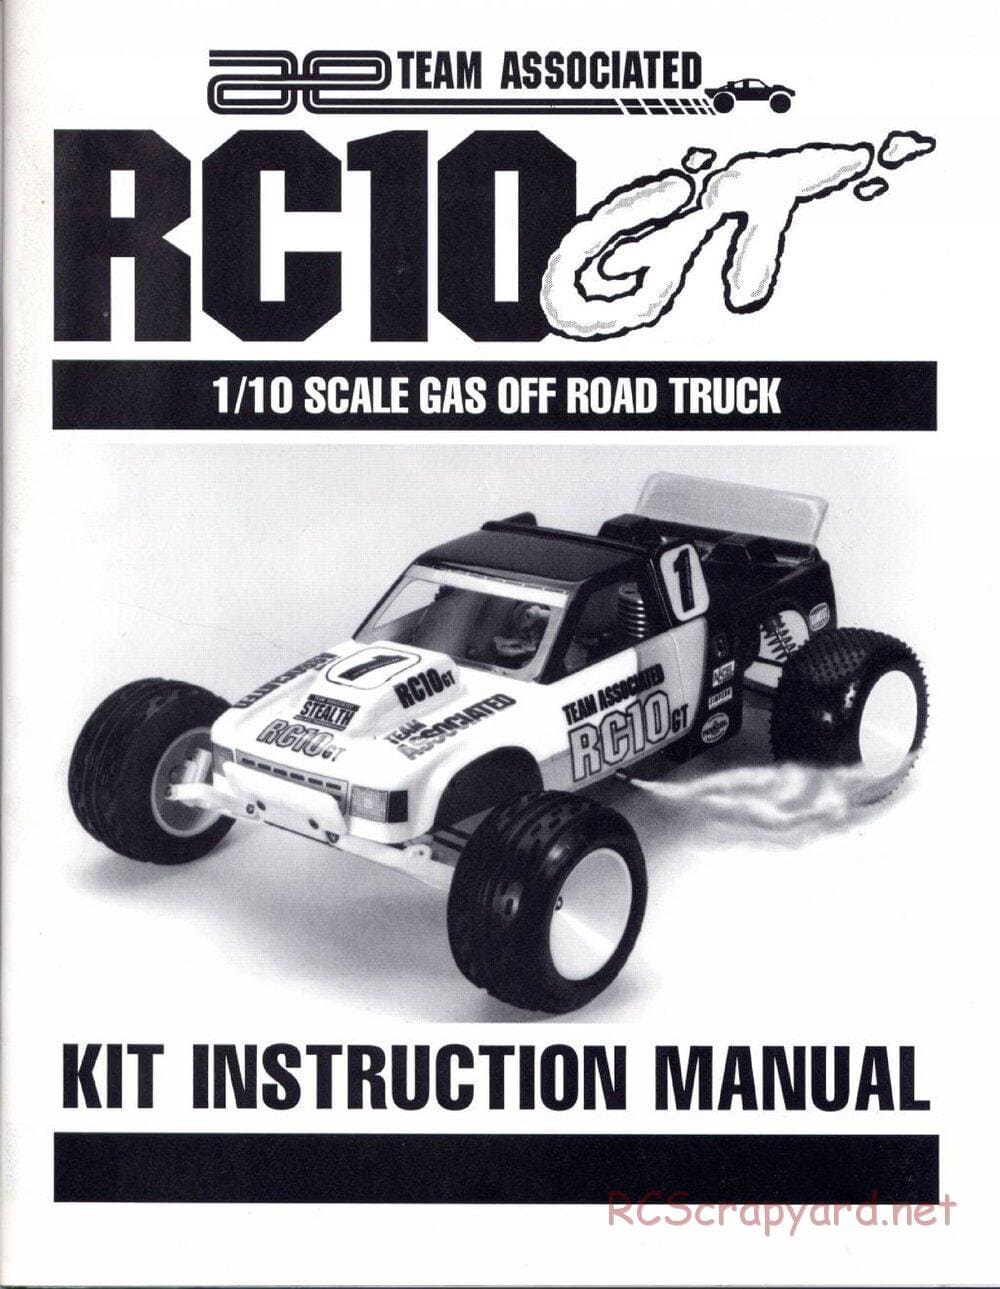 Team Associated - RC10GT (1993) - Manual - Page 1